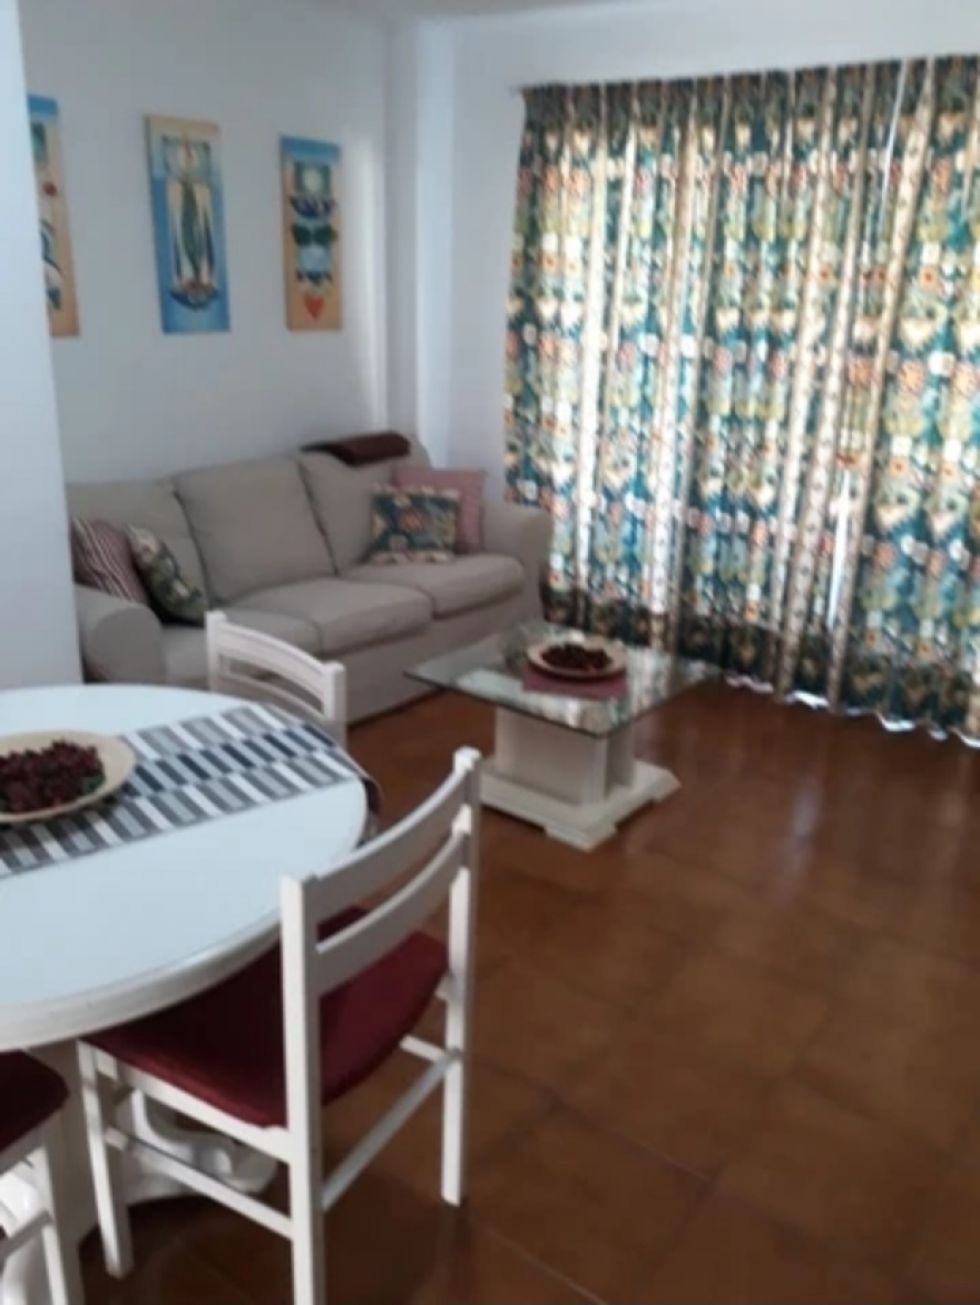 Apartment for sale in  Los Cristianos, Spain - TR-1370